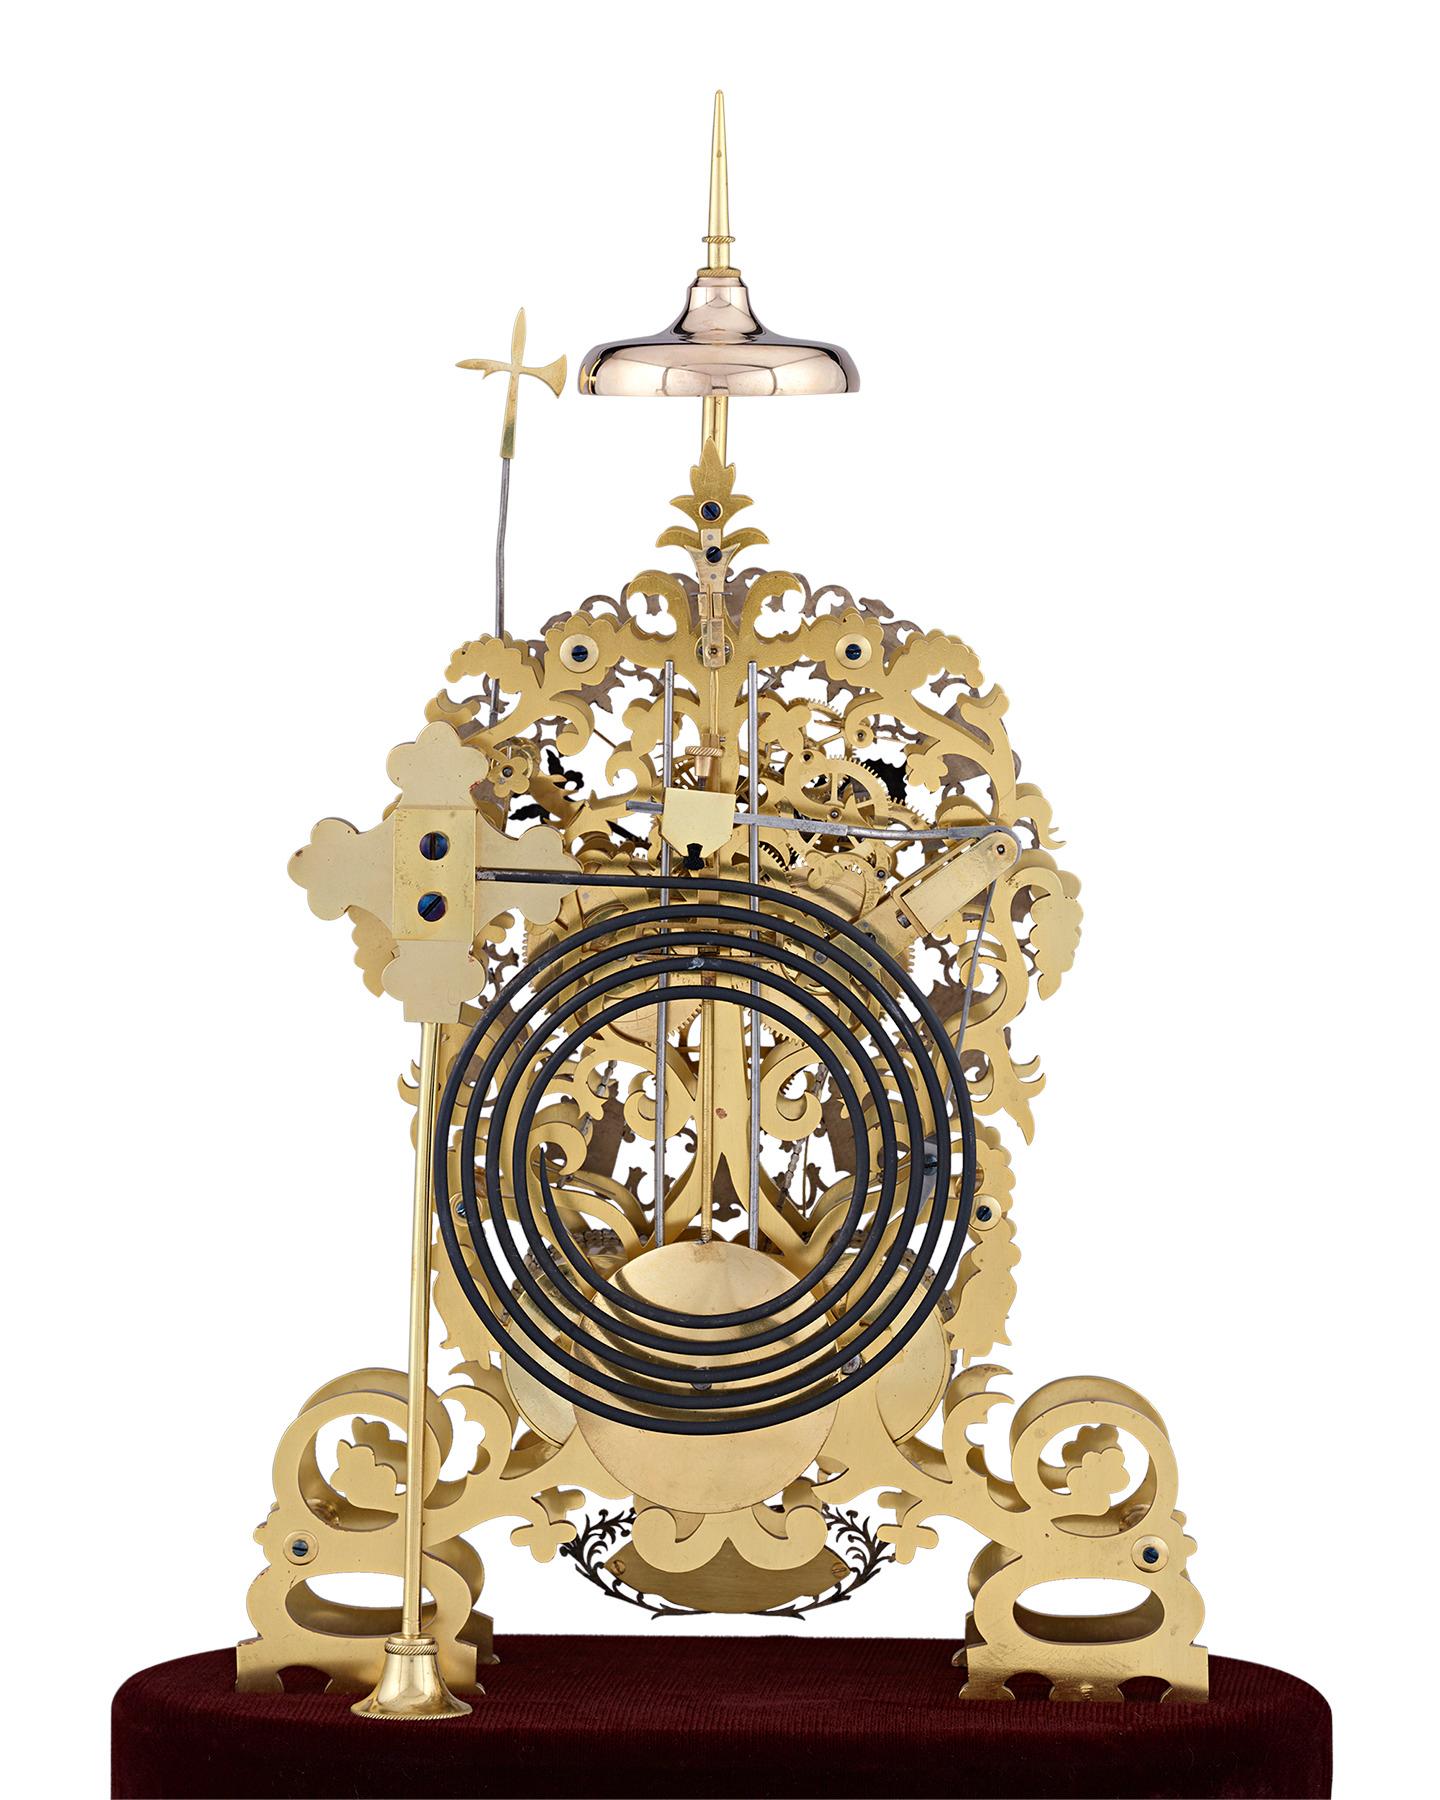 Other Exhibition Skeleton Clock by J. Smith & Sons of Clerkenwell